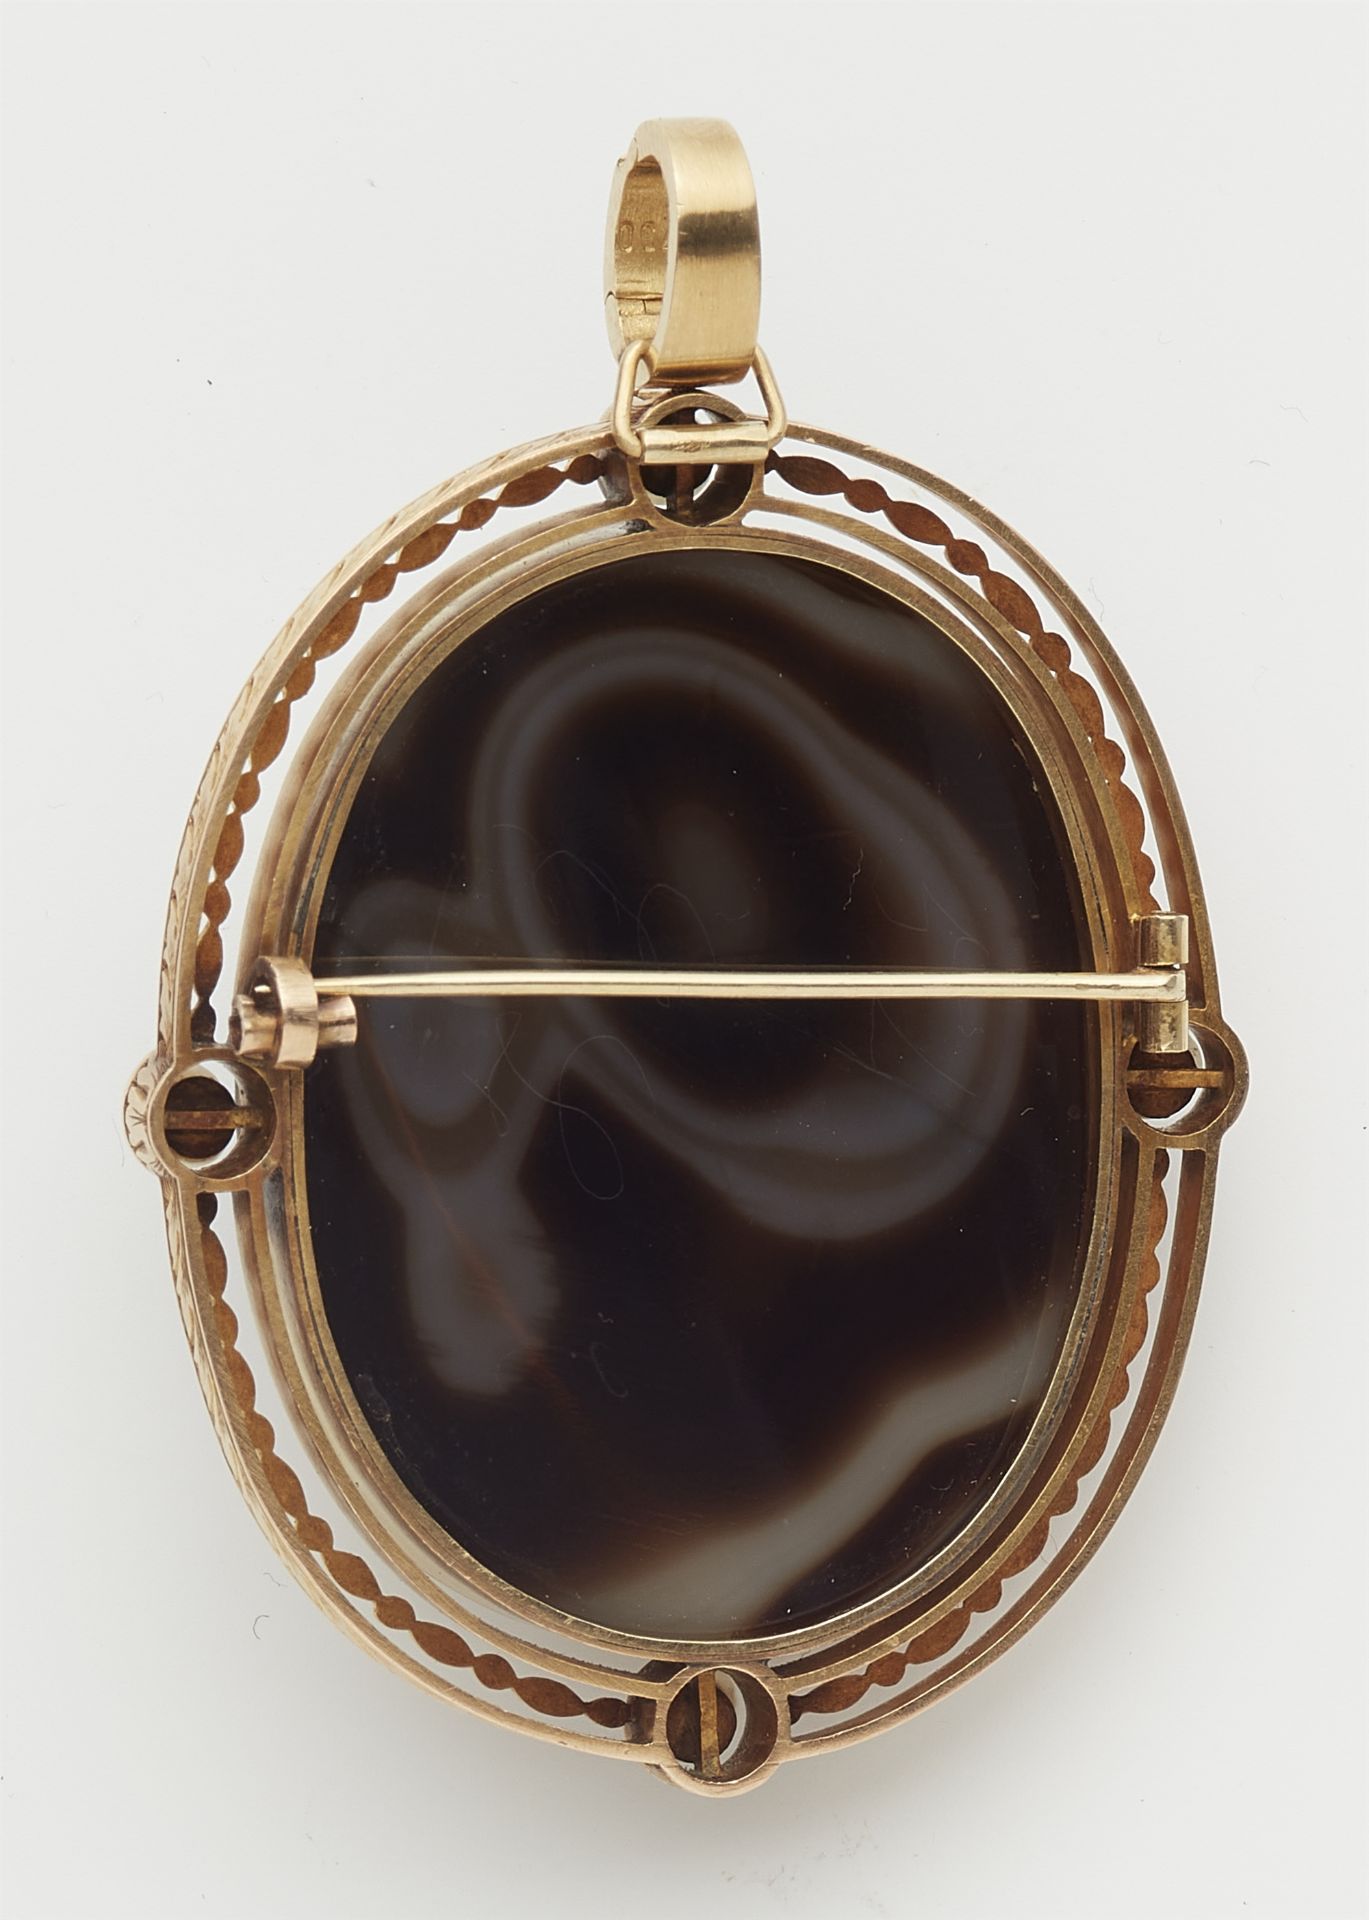 A 14k gold pearl pendant brooch with a layered agate cameo depicting Ceres. - Image 2 of 2